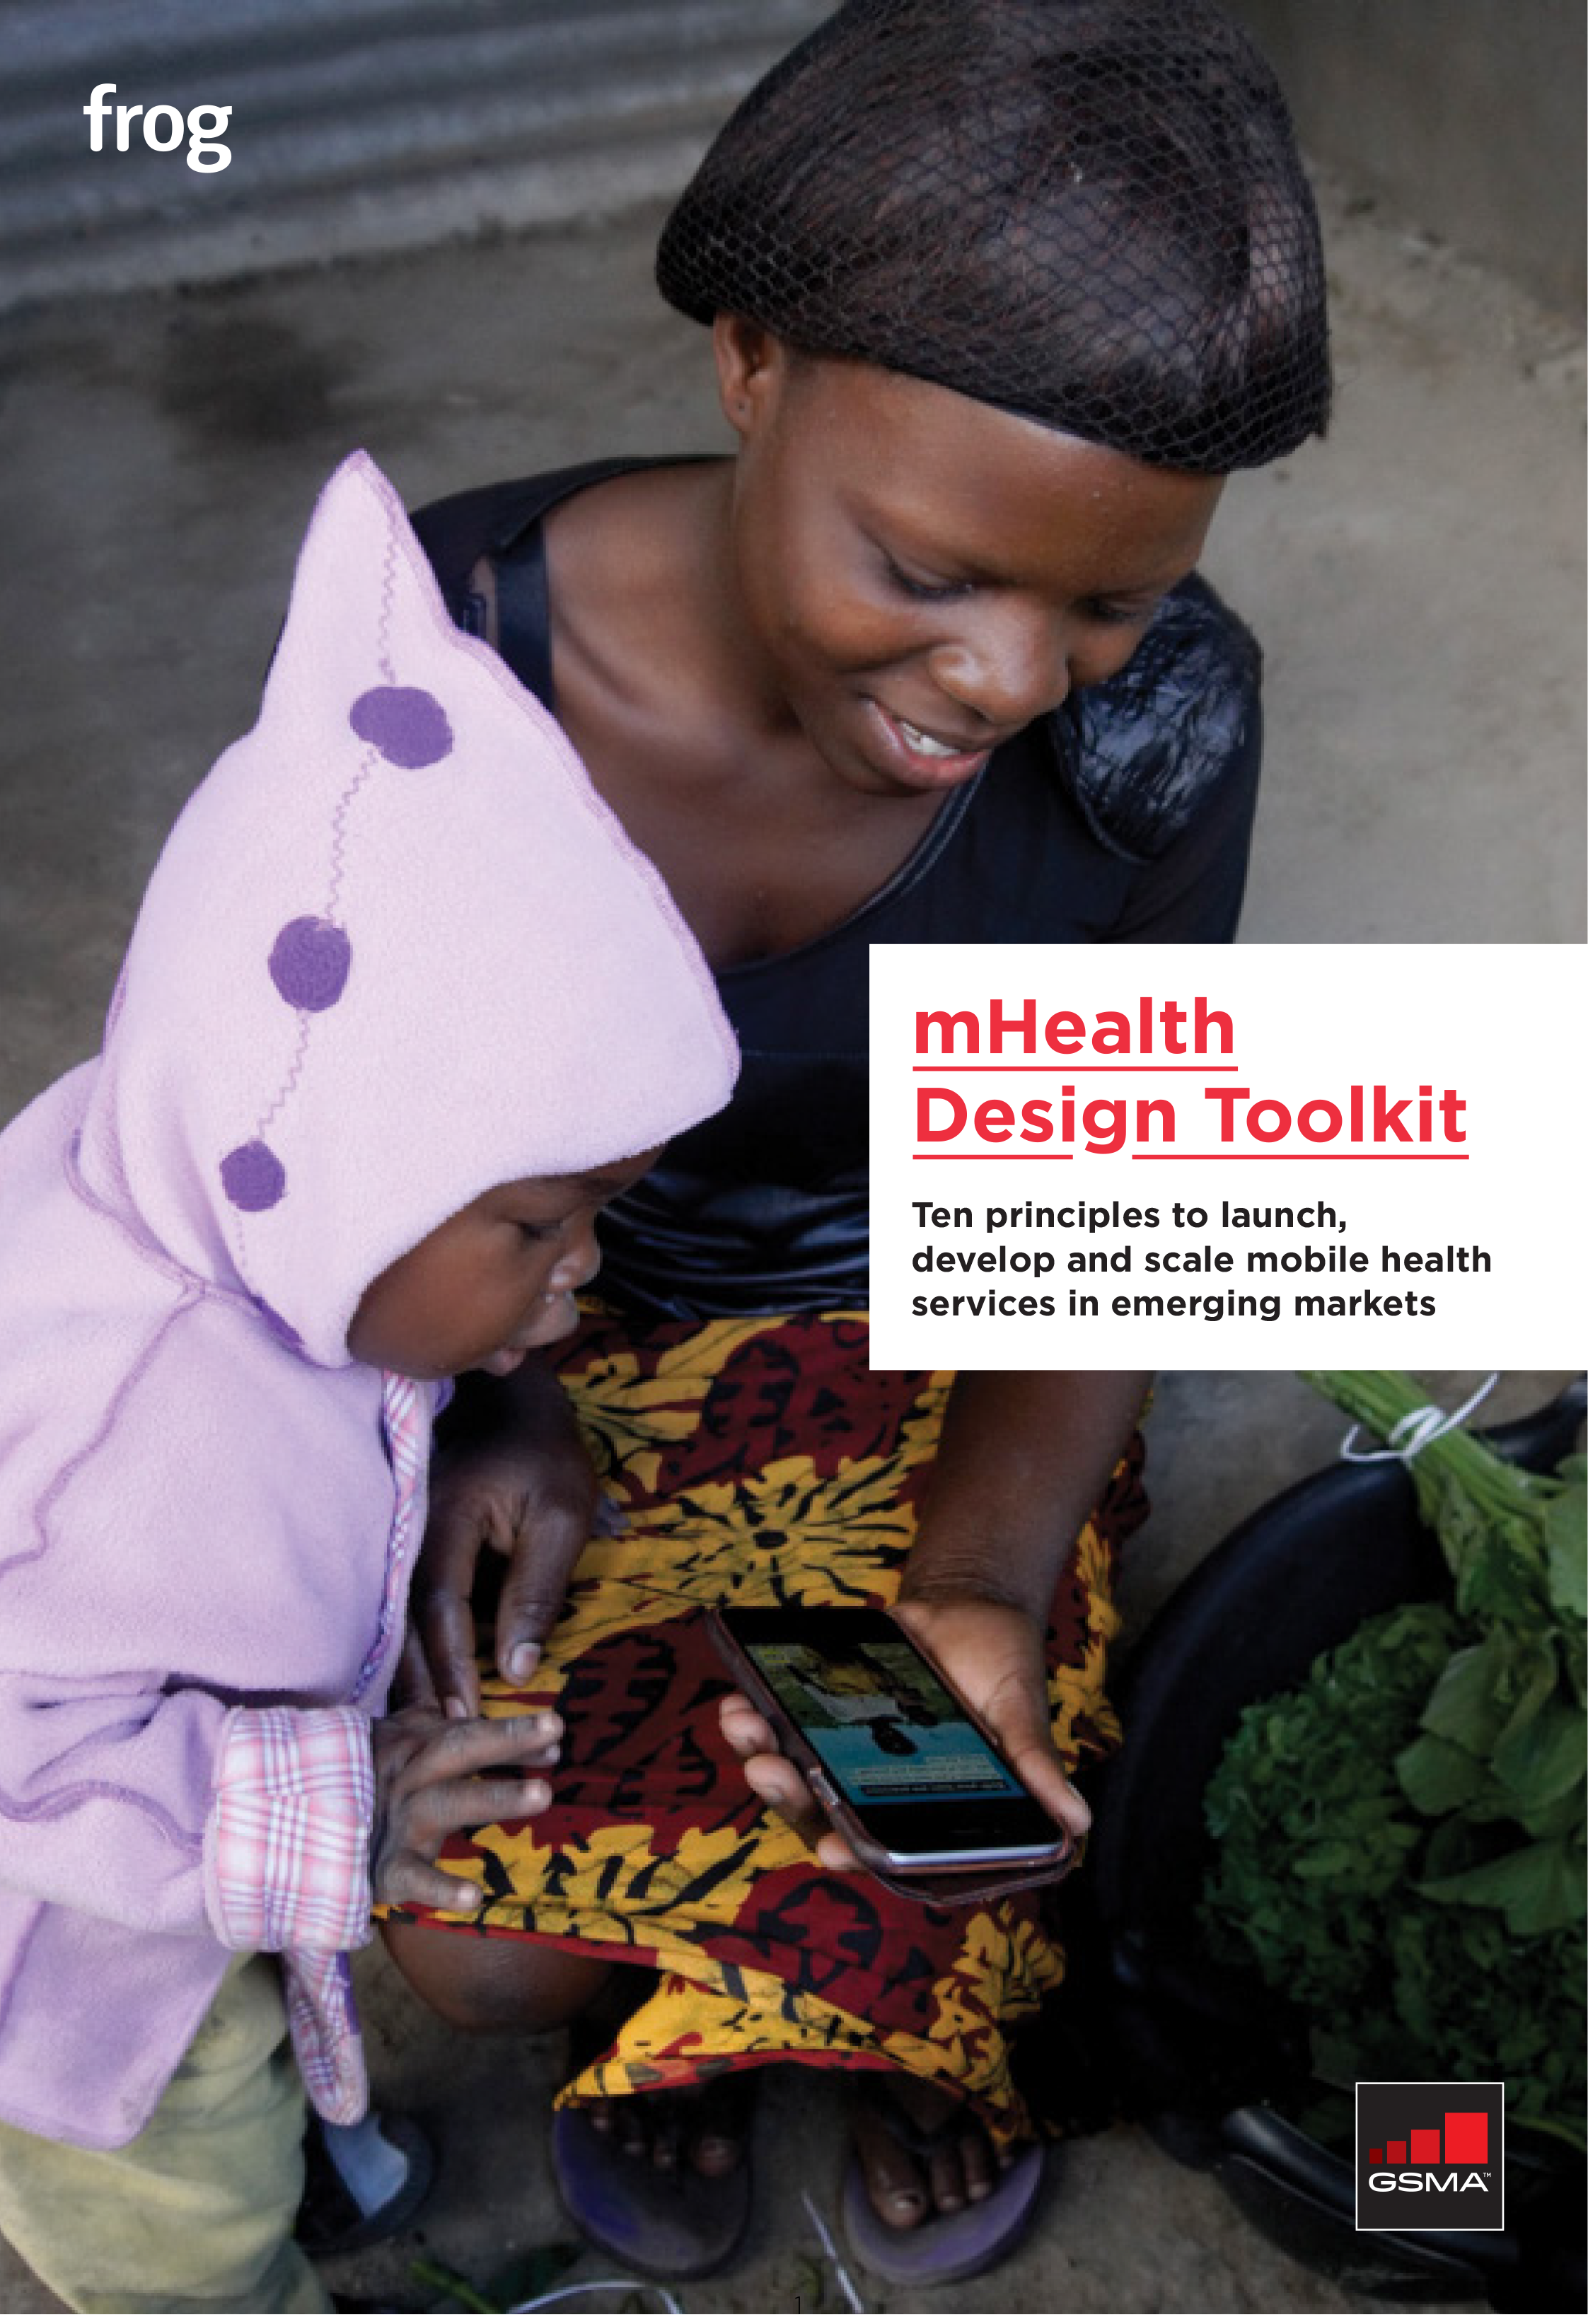 mHealth Design Toolkit – Ten principles to launch, develop and scale mobile health services image